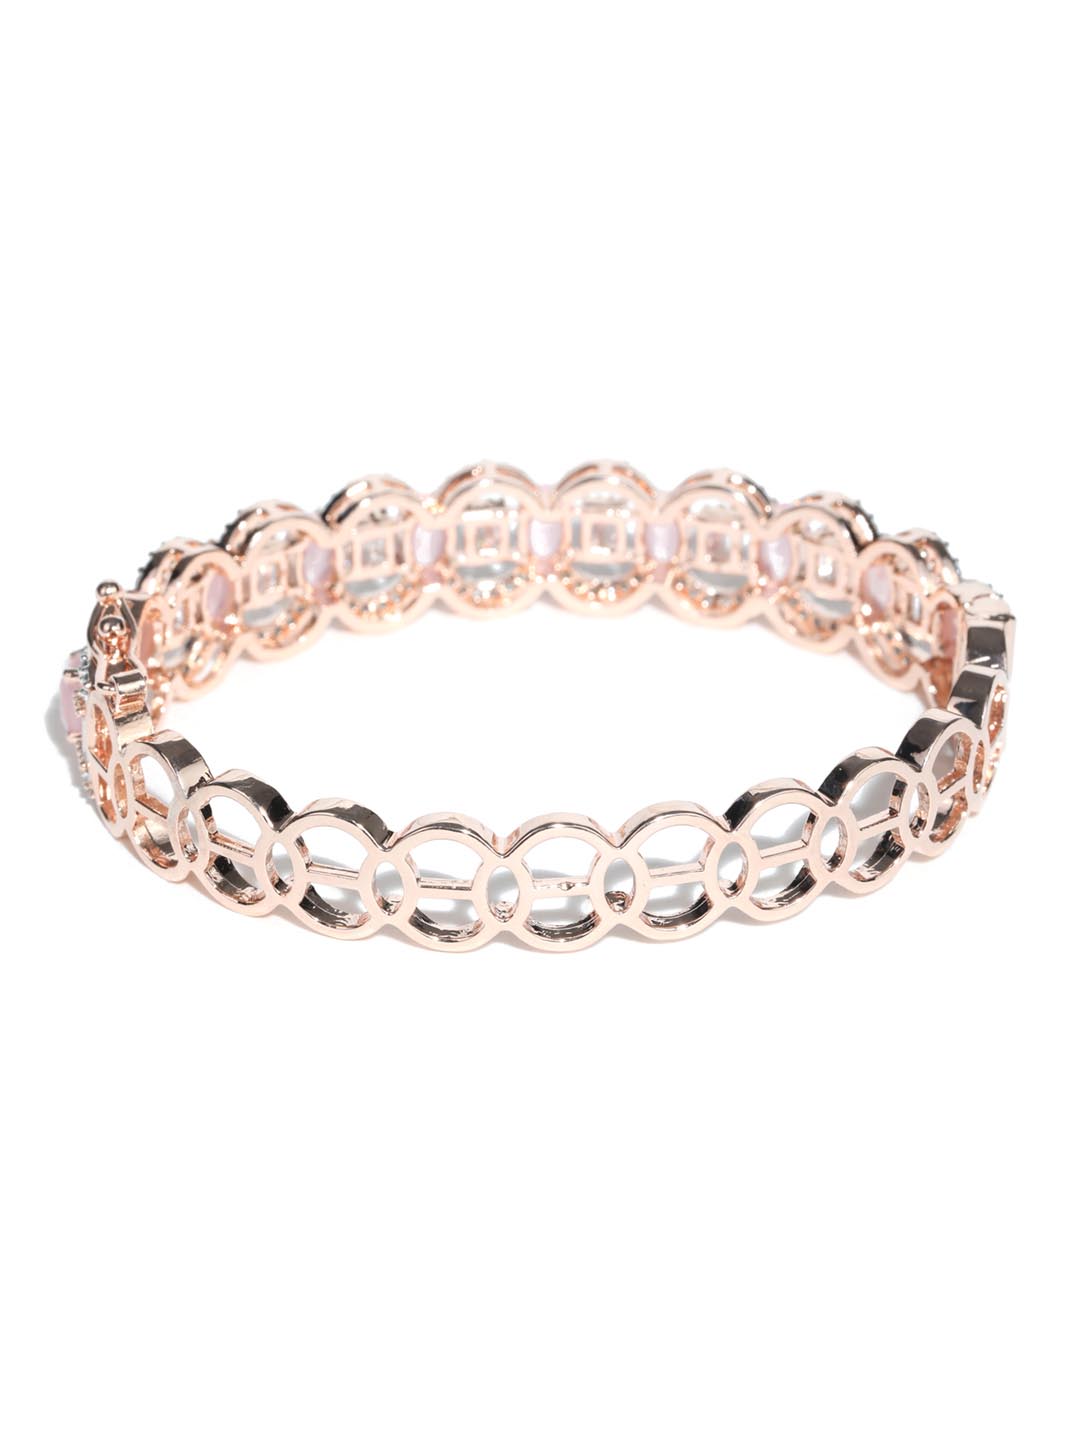 Pink American Diamond Rose Gold Plated Floral Bangle Style Bracelet